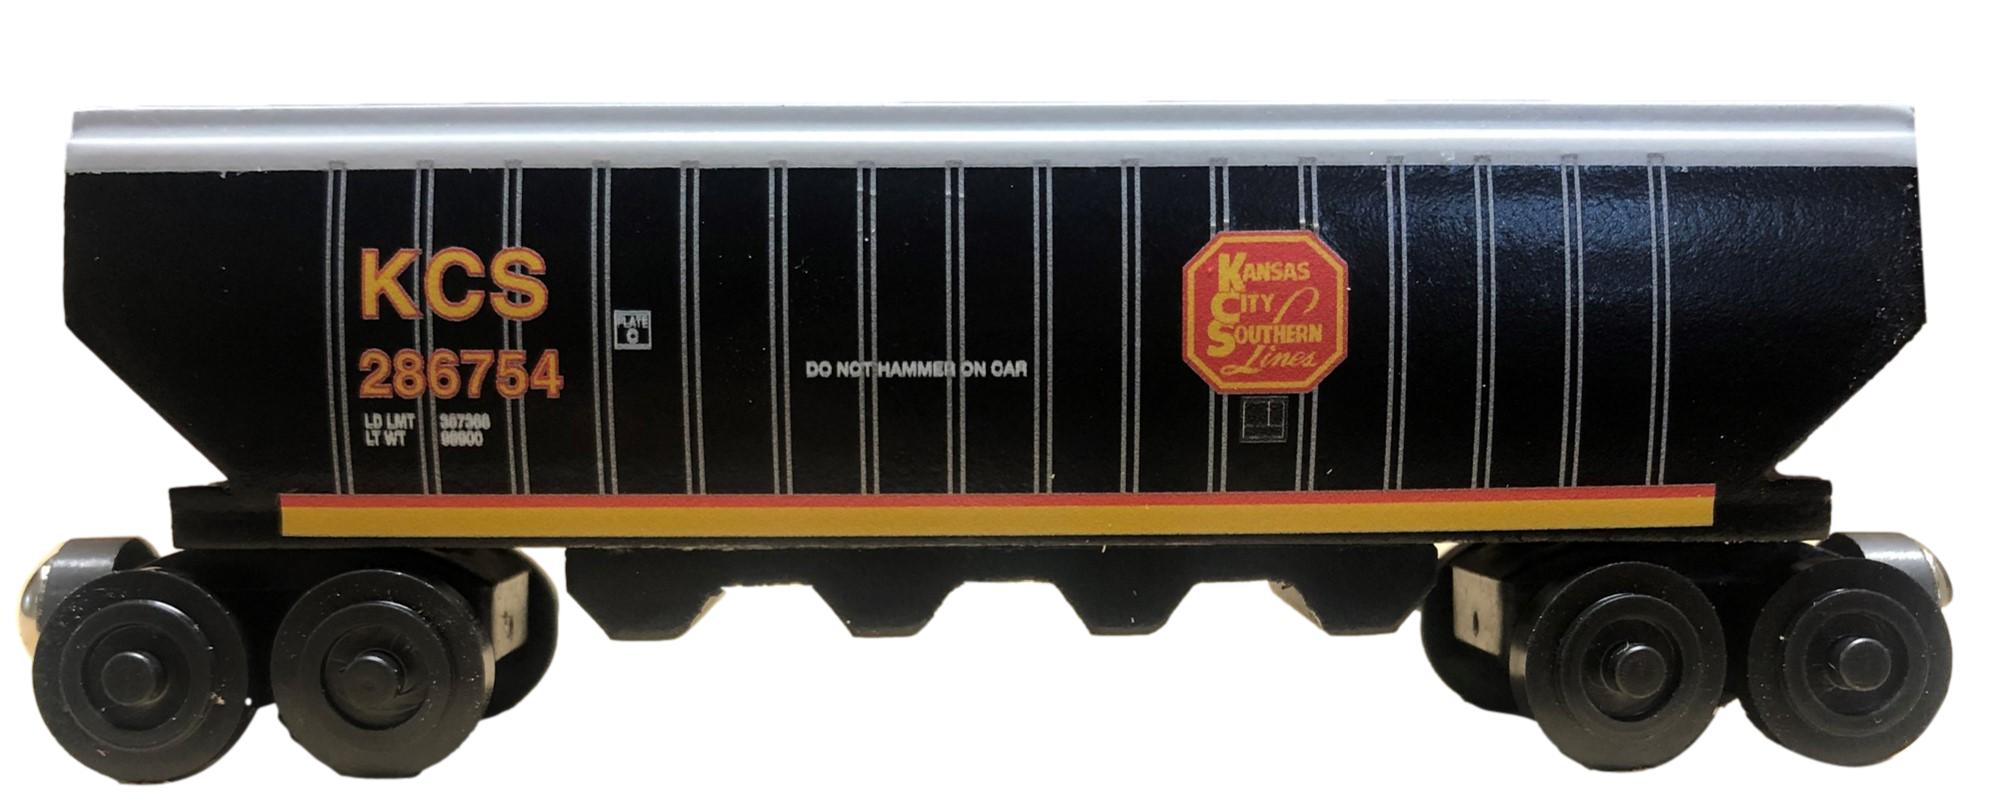 Kansas City Southern KCS Trinity Covered Hopper wooden toy train by The Whittle Shortline Railraod